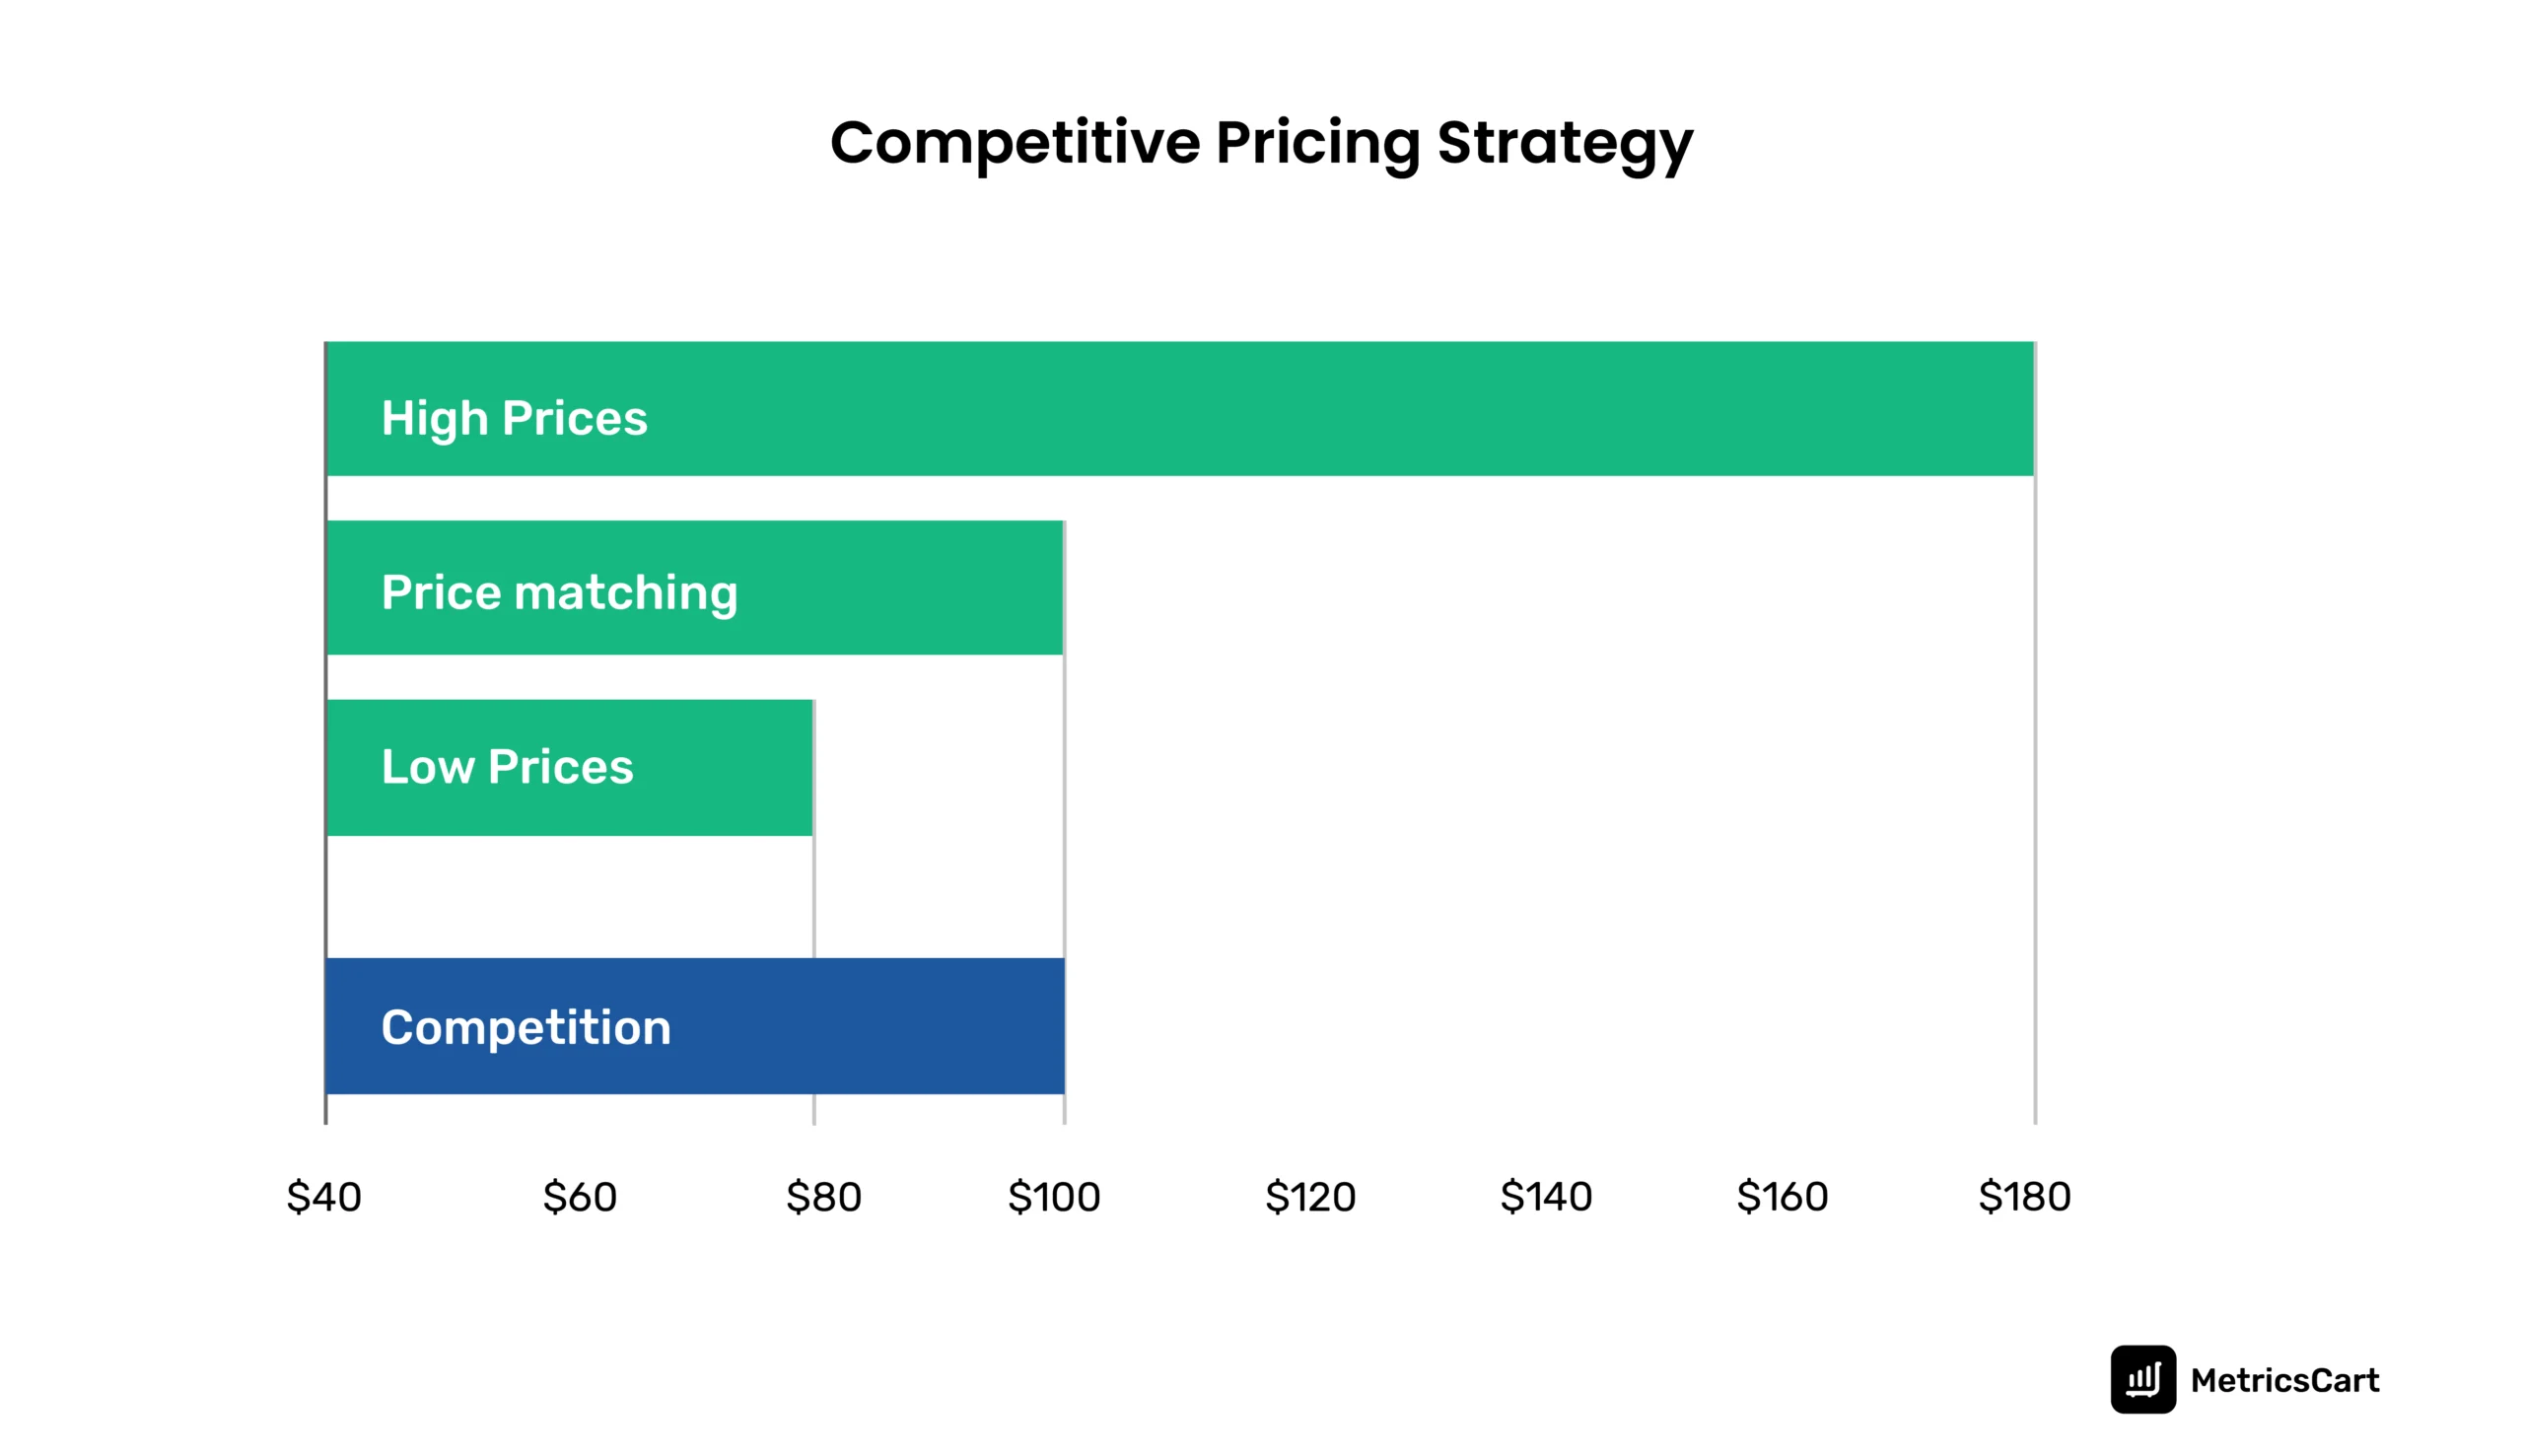 A graph-based description of how competitive pricing strategy works using different methods, such as price matching, low prices, and high prices. 